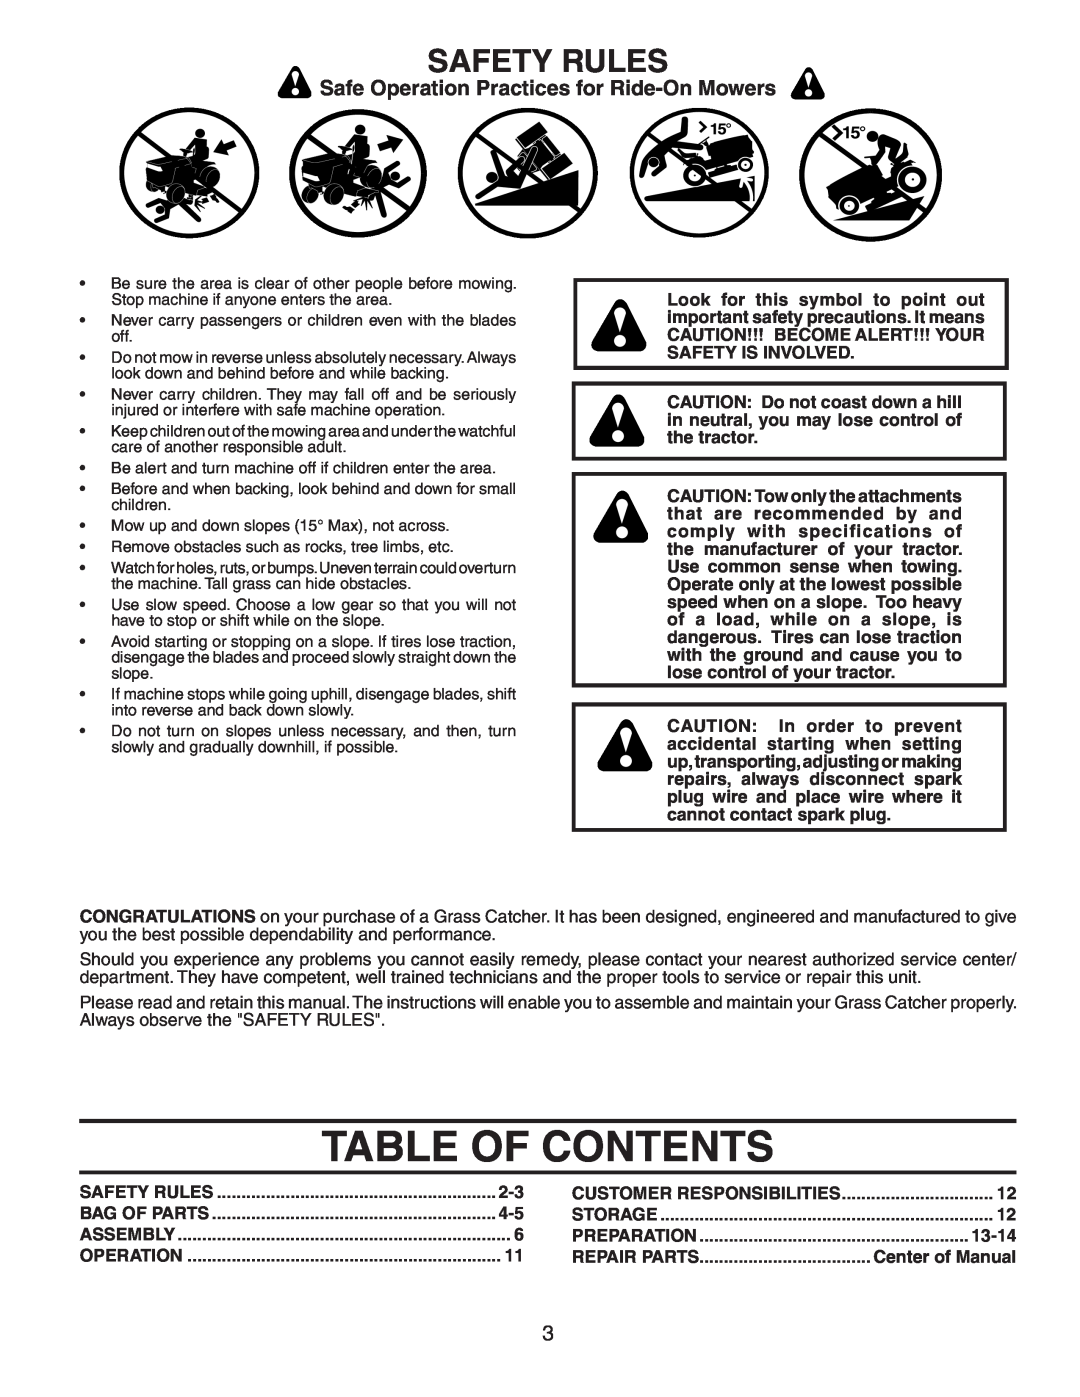 Poulan C38D, 954 14 00-50, 140603 owner manual Table Of Contents, Safety Rules, Safe Operation Practices for Ride-On Mowers 